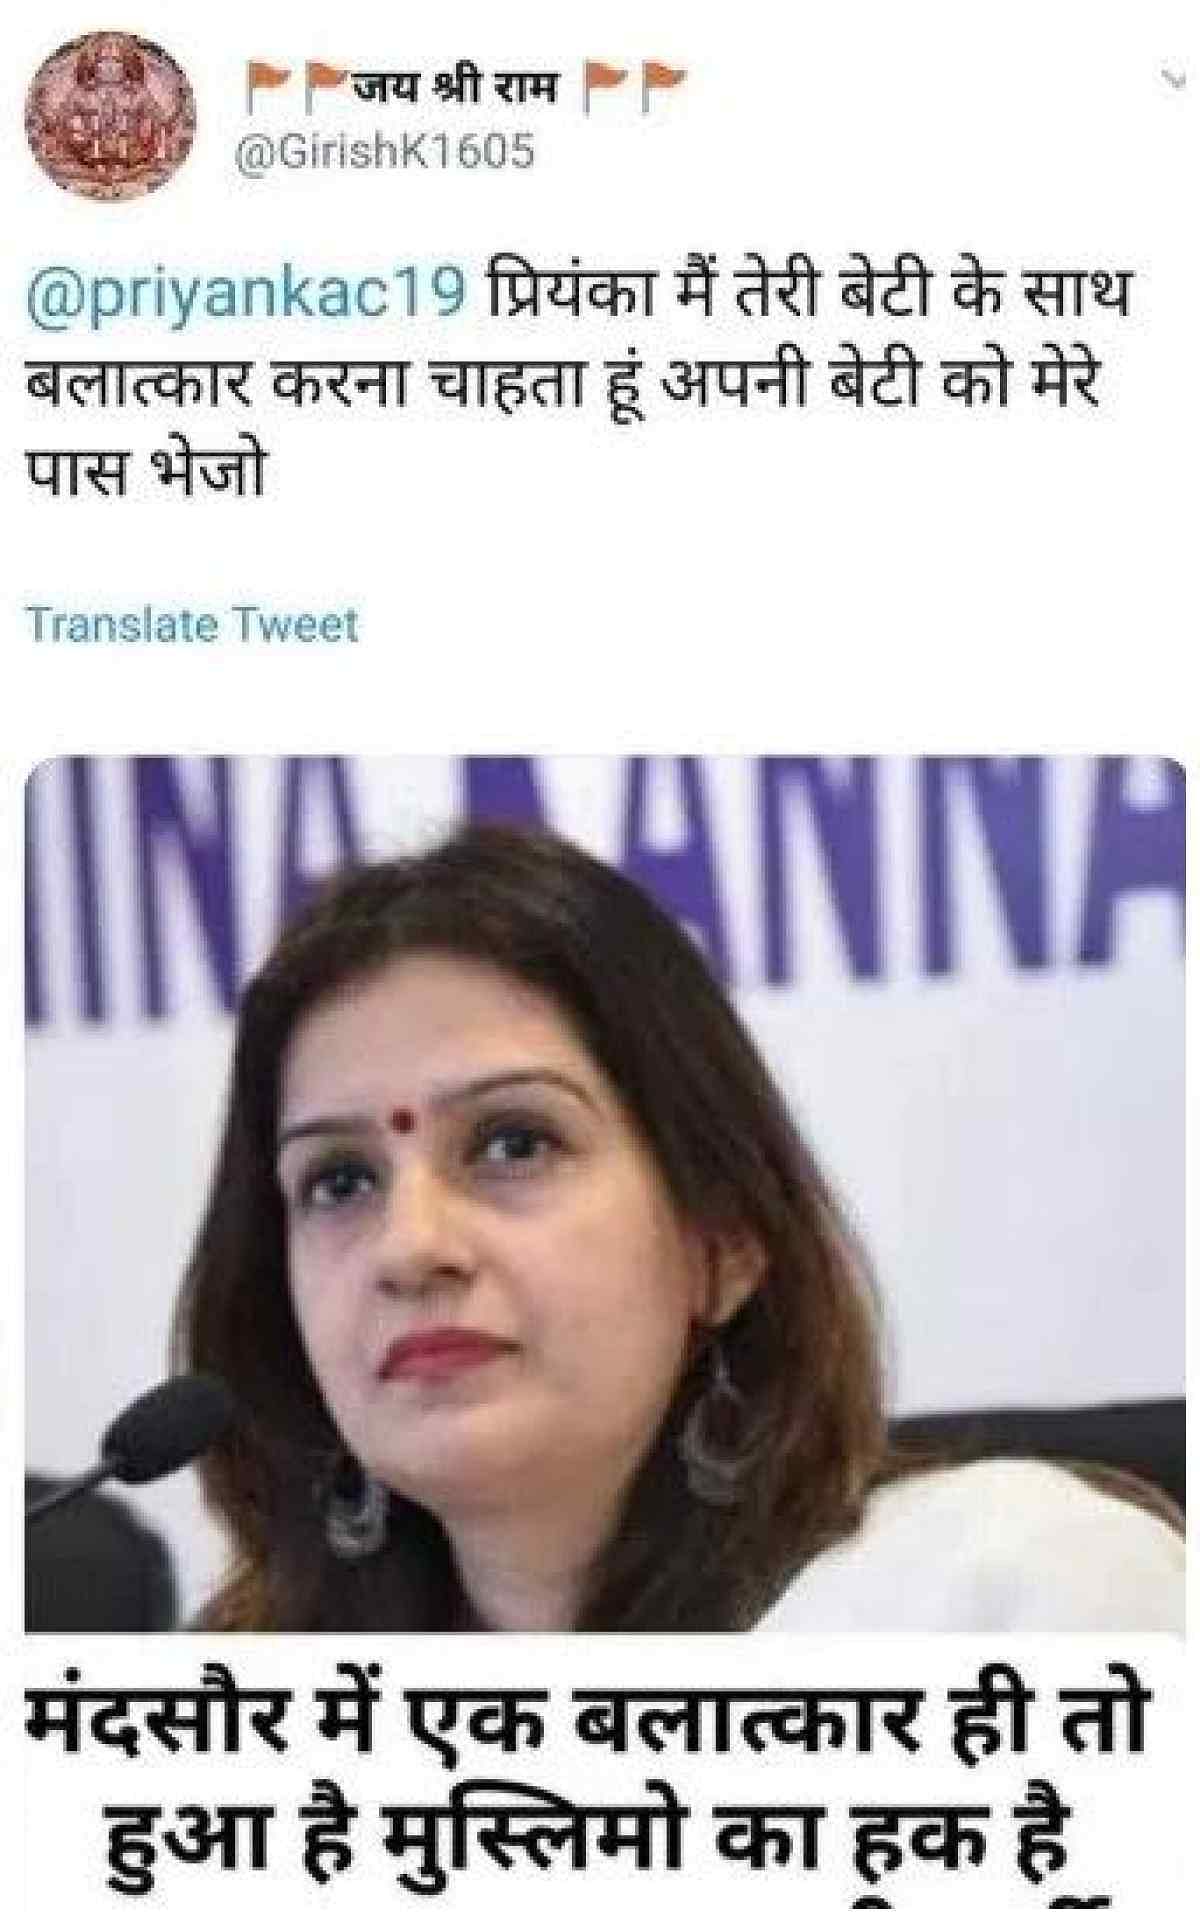 Congress leader Priyanka Chaturvedi had approached the police with a complaint on Monday, 2 July.